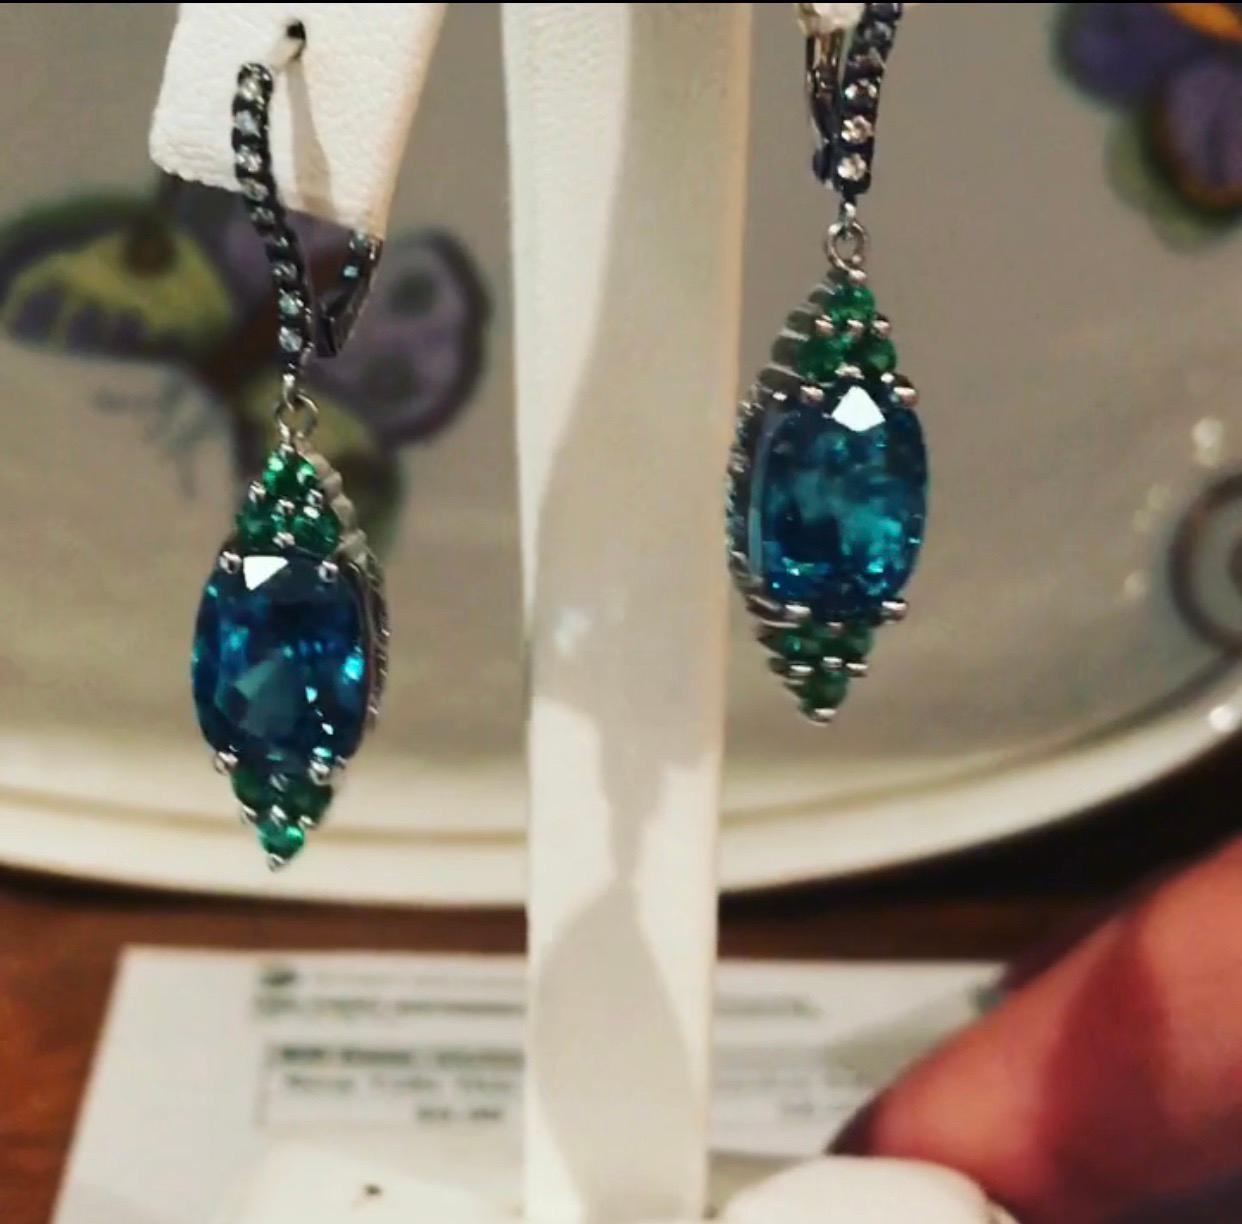 Bella Campbell For Campbellian Collection, 18 K White Gold Dangling Earrings Combine Blue Zircon And Green Garnet, Accented With Diamonds As  the Side Detail and on the Lever Back. Blue Zircon And Green Garnet Make Striking Color Combination, The